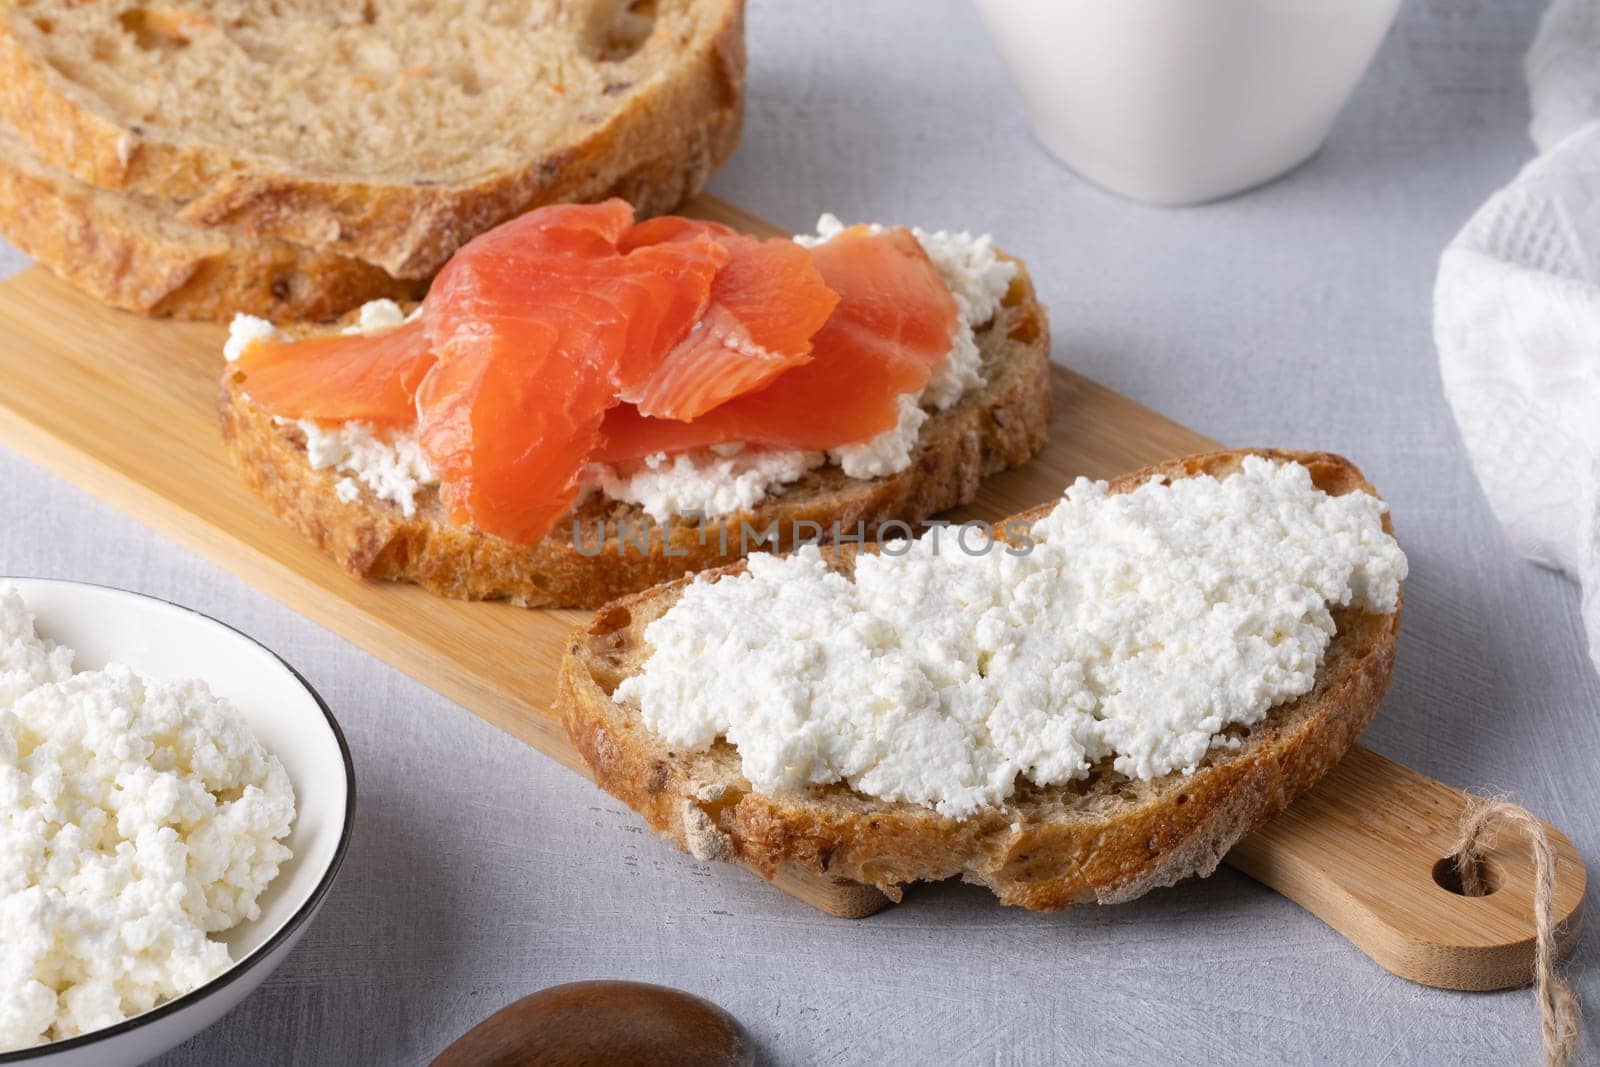 Sandwich with salted salmon and cottage cheese on a wooden table.